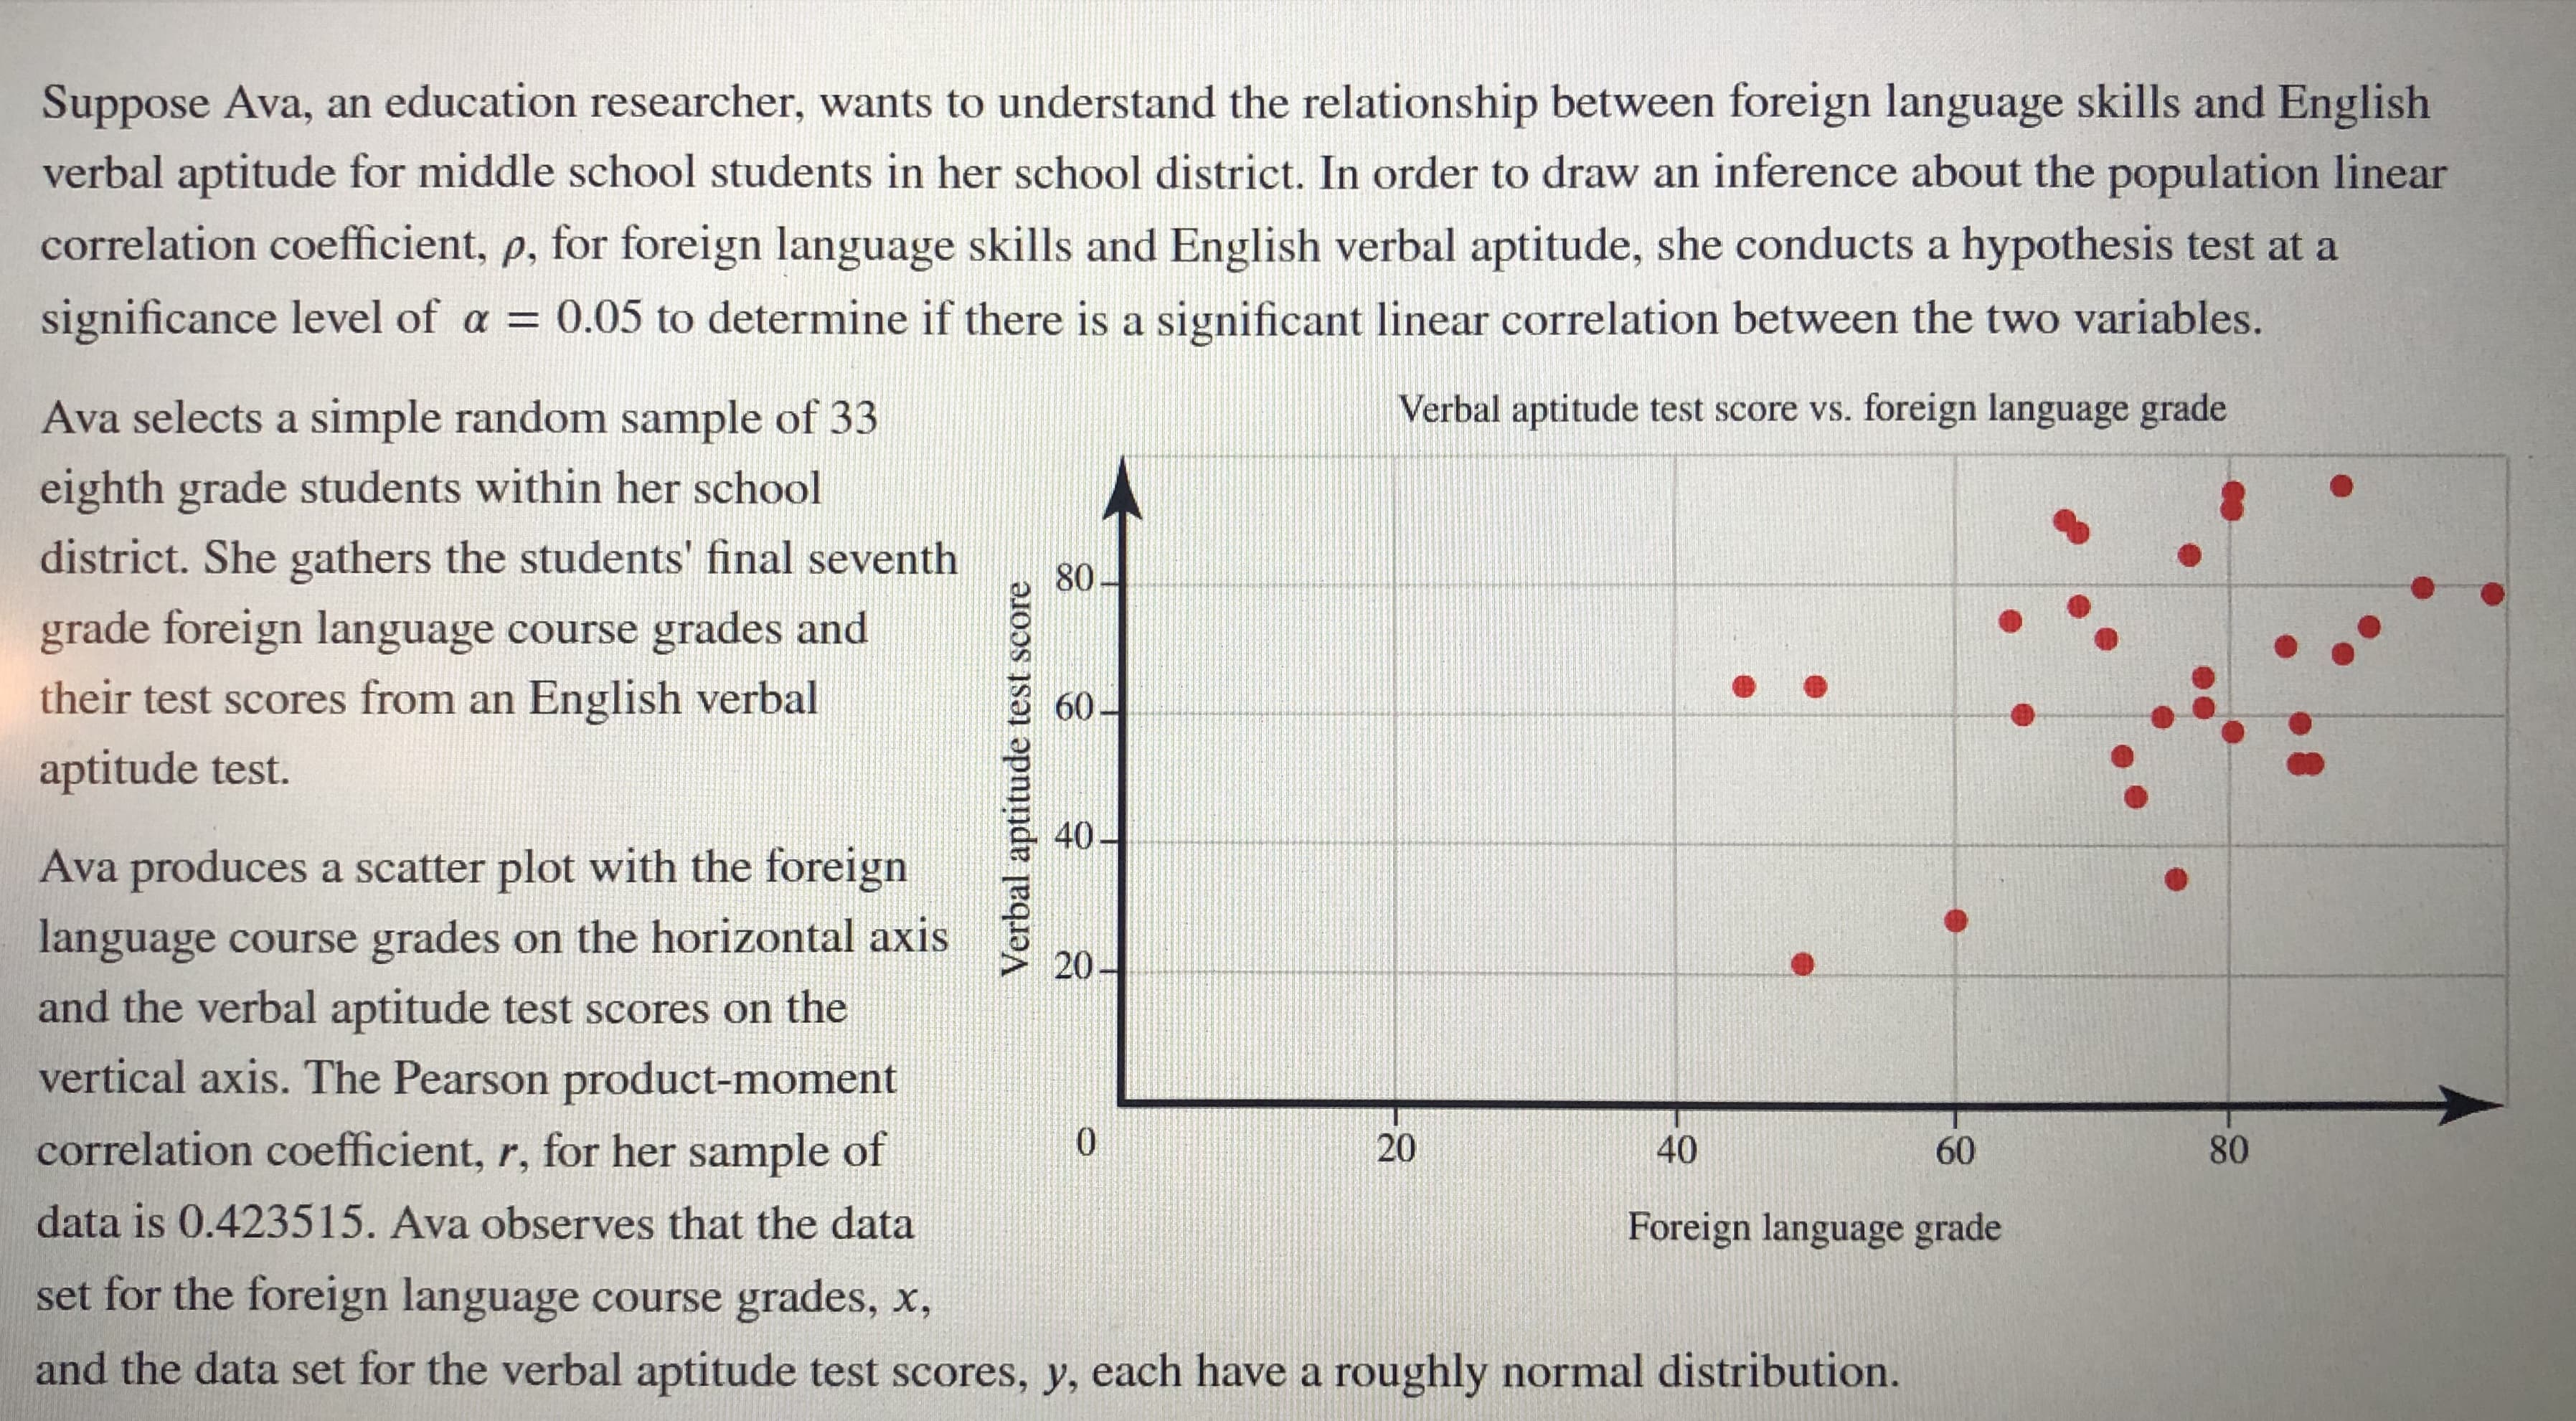 Suppose Ava, an education researcher, wants to understand the relationship between foreign language skills and English
verbal aptitude for middle school students in her school district. In order to draw an inference about the population linear
correlation coefficient, p, for foreign language skills and English verbal aptitude, she conducts a hypothesis test at a
significance level of a = 0.05 to determine if there is a significant linear correlation between the two variables.
Ava selects a simple random sample of 33
Verbal aptitude test score vs. foreign language grade
eighth grade students within her school
district. She gathers the students' final seventh
80
grade foreign language course grades and
their test scores from an English verbal
60
aptitude test.
40-
Ava produces a scatter plot with the foreign
language course grades on the horizontal axis
and the verbal aptitude test scores on the
20
vertical axis. The Pearson product-moment
correlation coefficient, r, for her sample of
20
40
60
80
data is 0.423515. Ava observes that the data
Foreign language grade
set for the foreign language course grades, x,
and the data set for the verbal aptitude test scores, y, each have a roughly normal distribution.
Verbal aptitude test score
